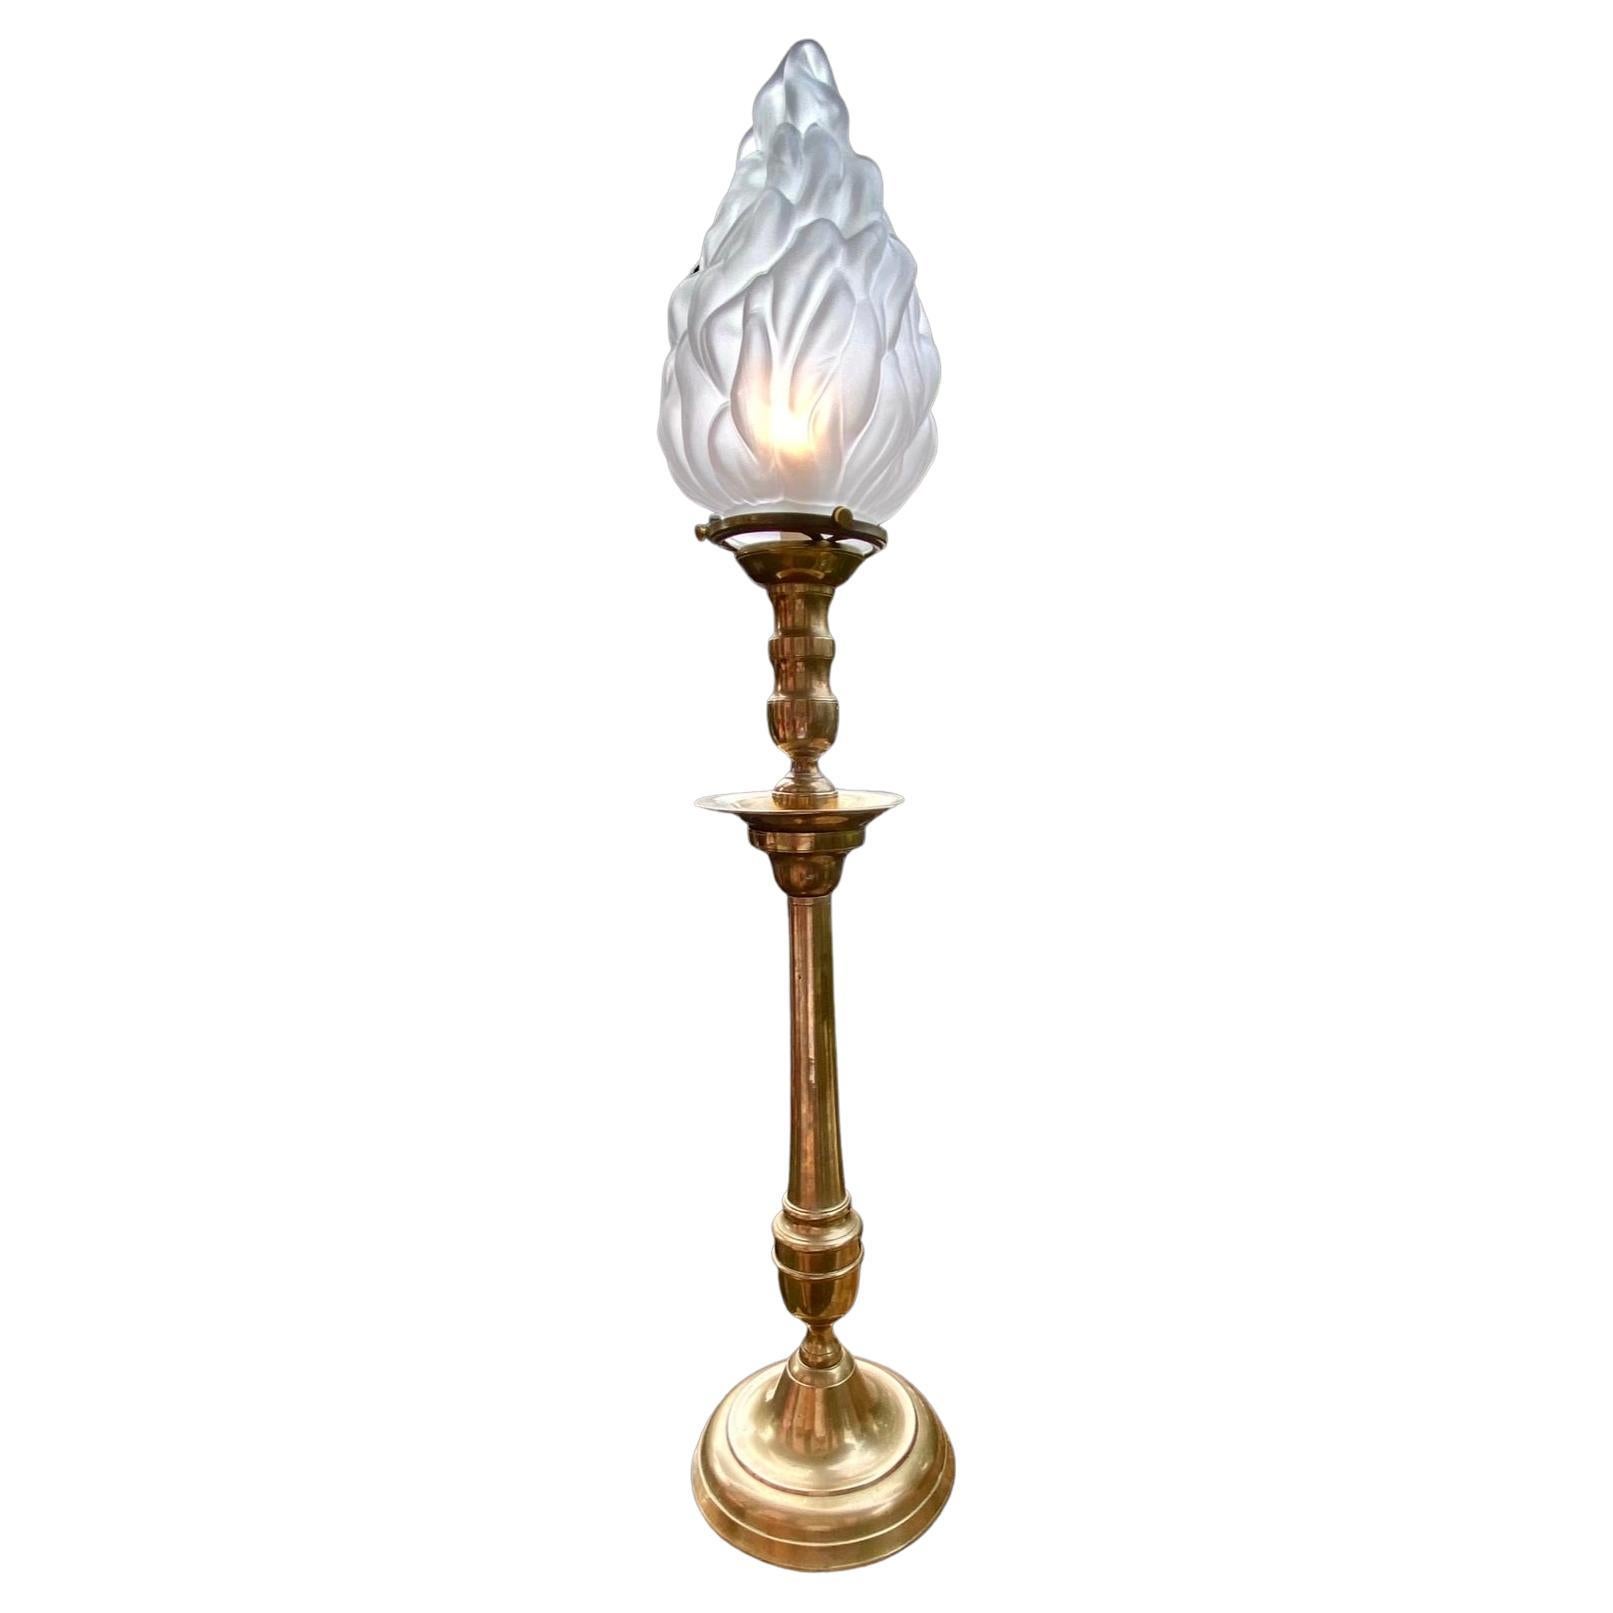 Vintage French Brass Candlestick Lamp with Frosted Flame Shade